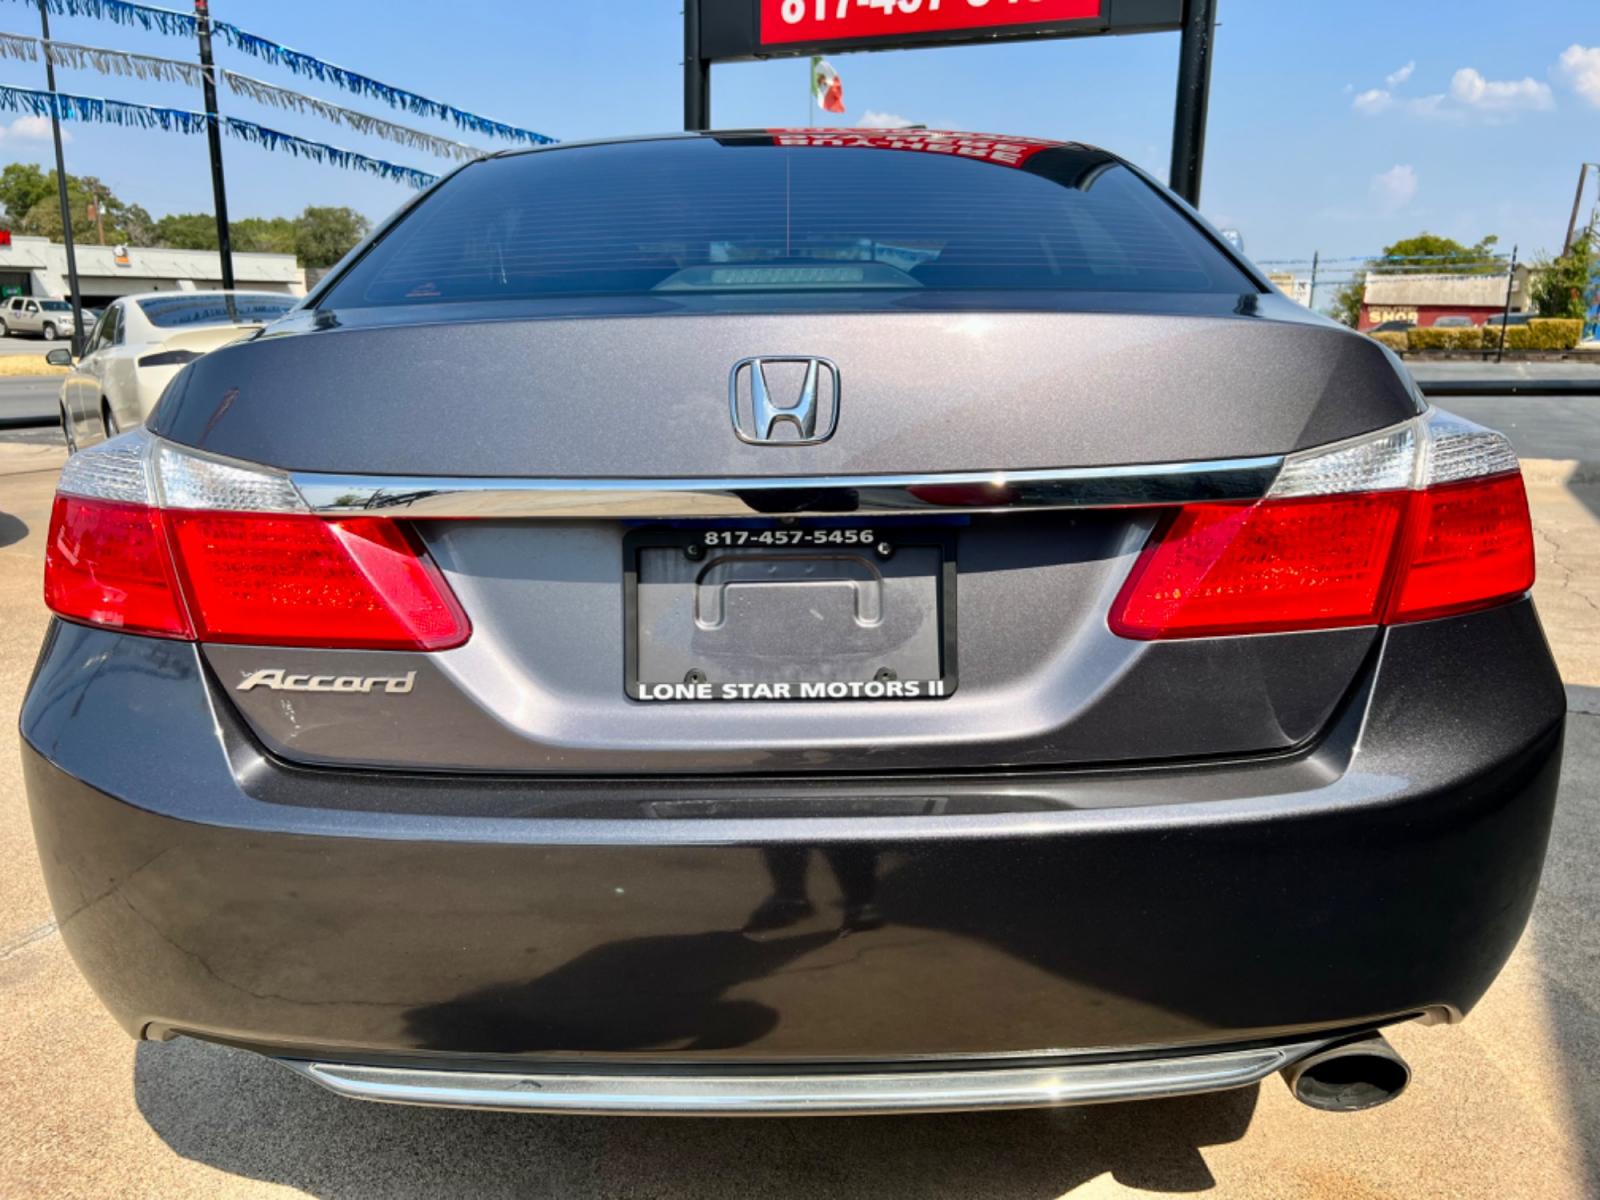 2015 SILVER HONDA ACCORD (1HGCR2F36FA) , located at 5900 E. Lancaster Ave., Fort Worth, TX, 76112, (817) 457-5456, 0.000000, 0.000000 - This is a 2015 HONDA ACCORD 4 DOOR SEDAN that is in excellent condition. There are no dents or scratches. The interior is clean with no rips or tears or stains. All power windows, door locks and seats. Ice cold AC for those hot Texas summer days. It is equipped with a CD player, AM/FM radio, AUX por - Photo #5